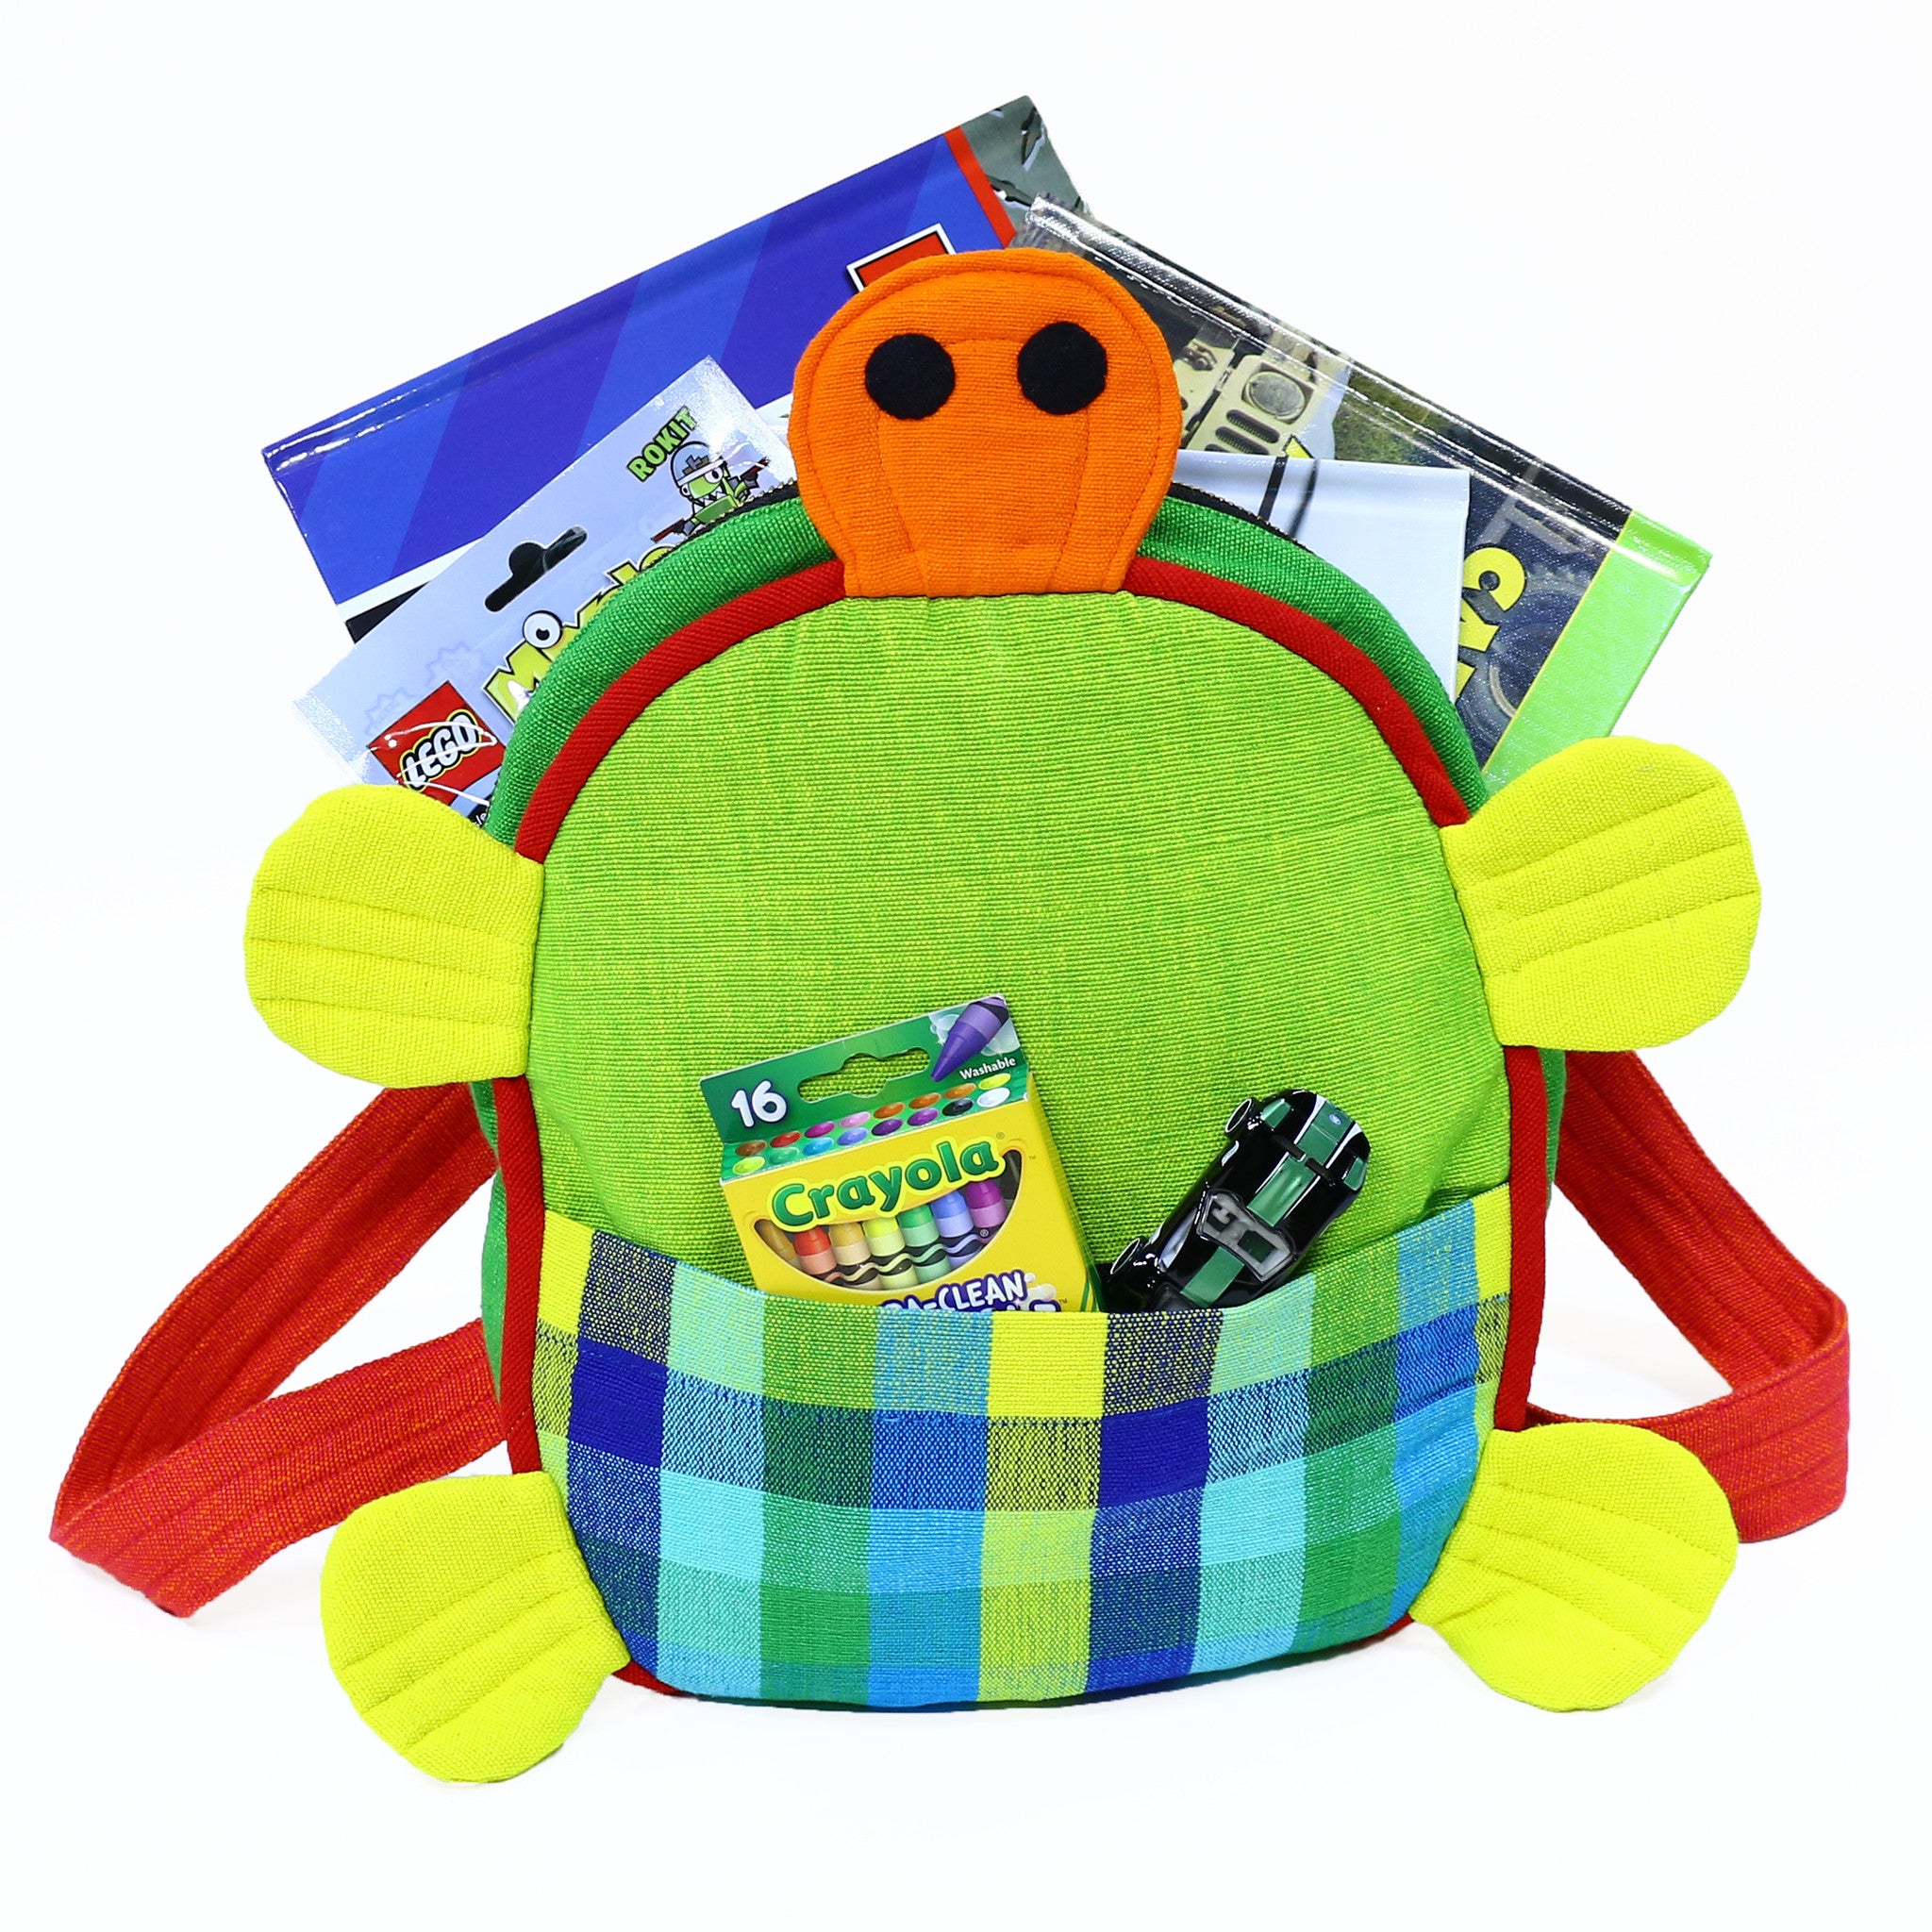 Turtle Backpack – very cute and holds a lot!